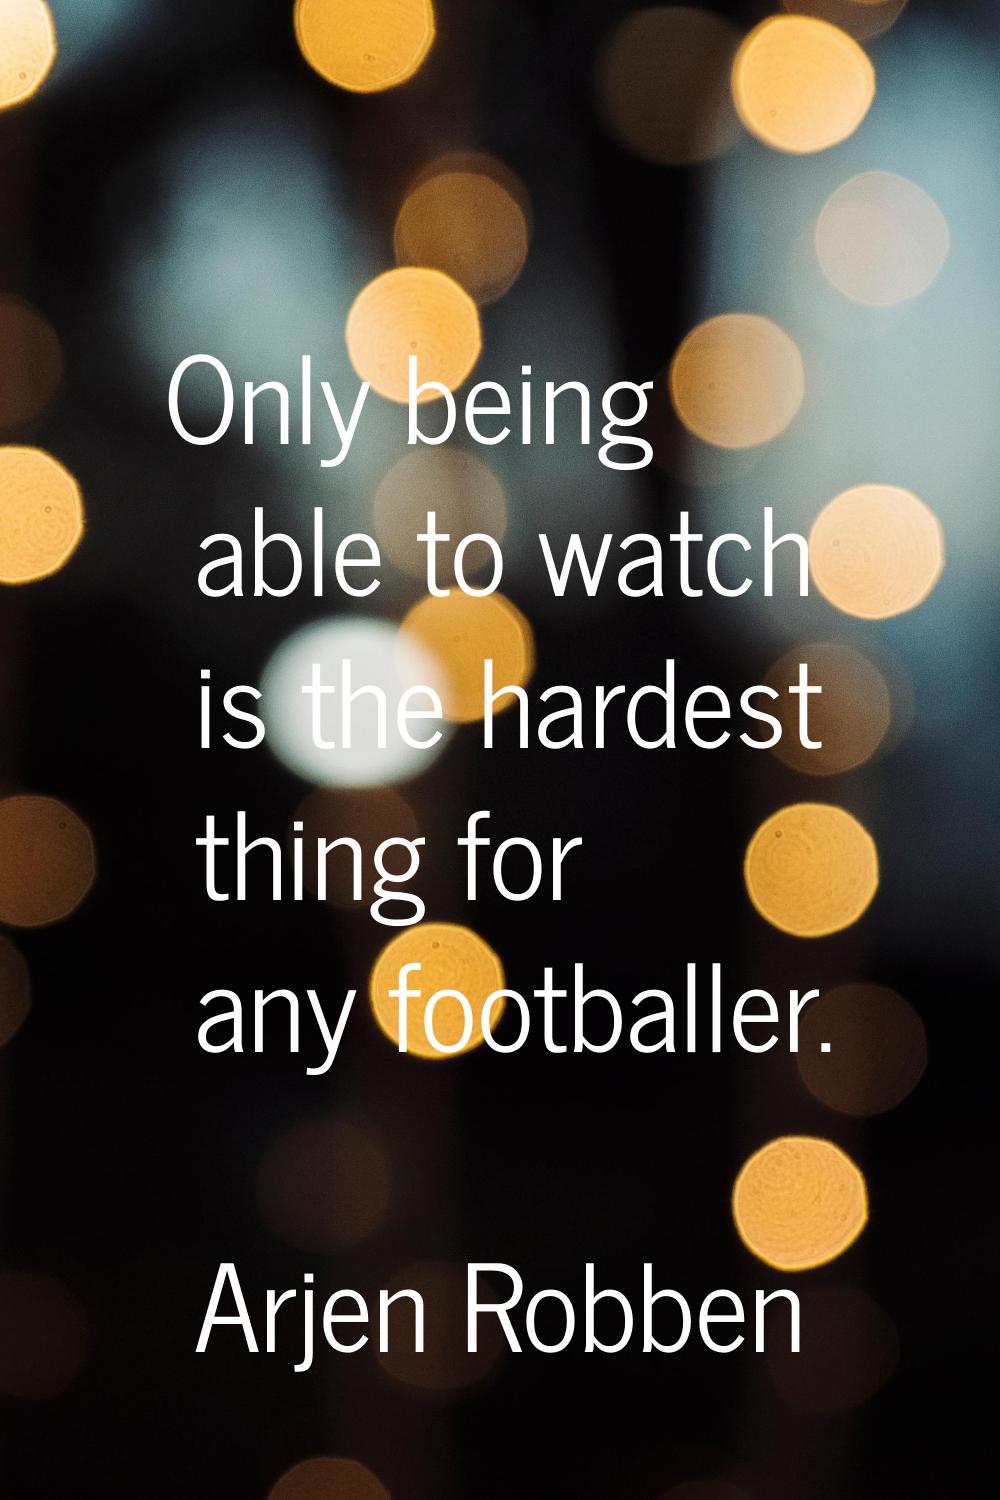 Only being able to watch is the hardest thing for any footballer.